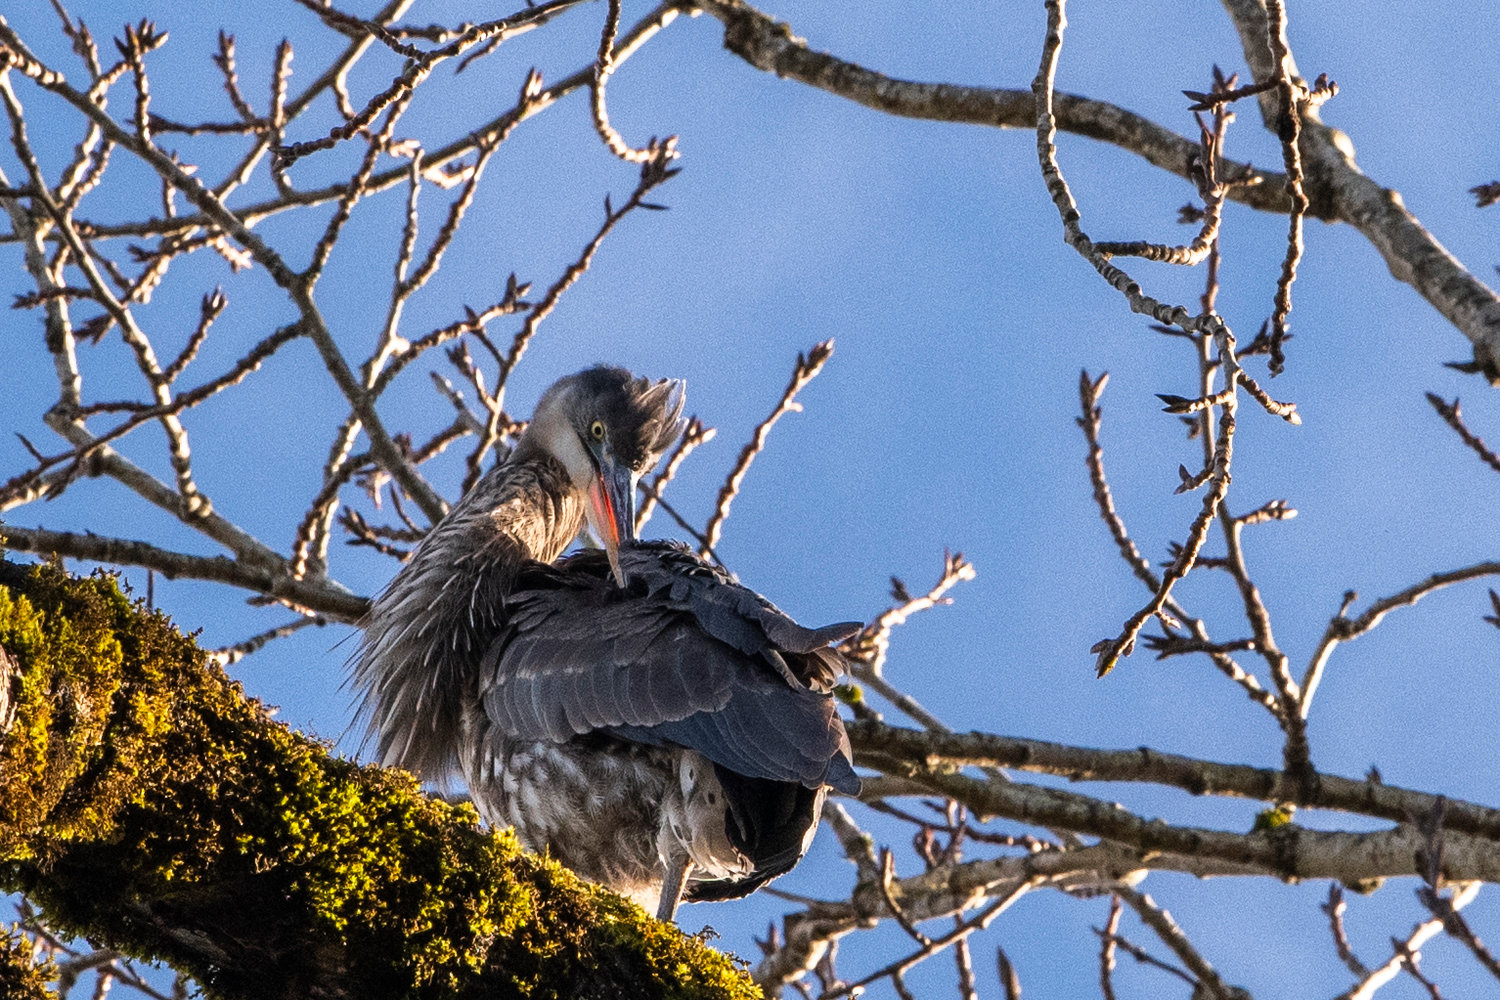 Beside Fort Borst Lake in Centralia on Monday, a great blue heron preens its feathers and basks in the afternoon sun.